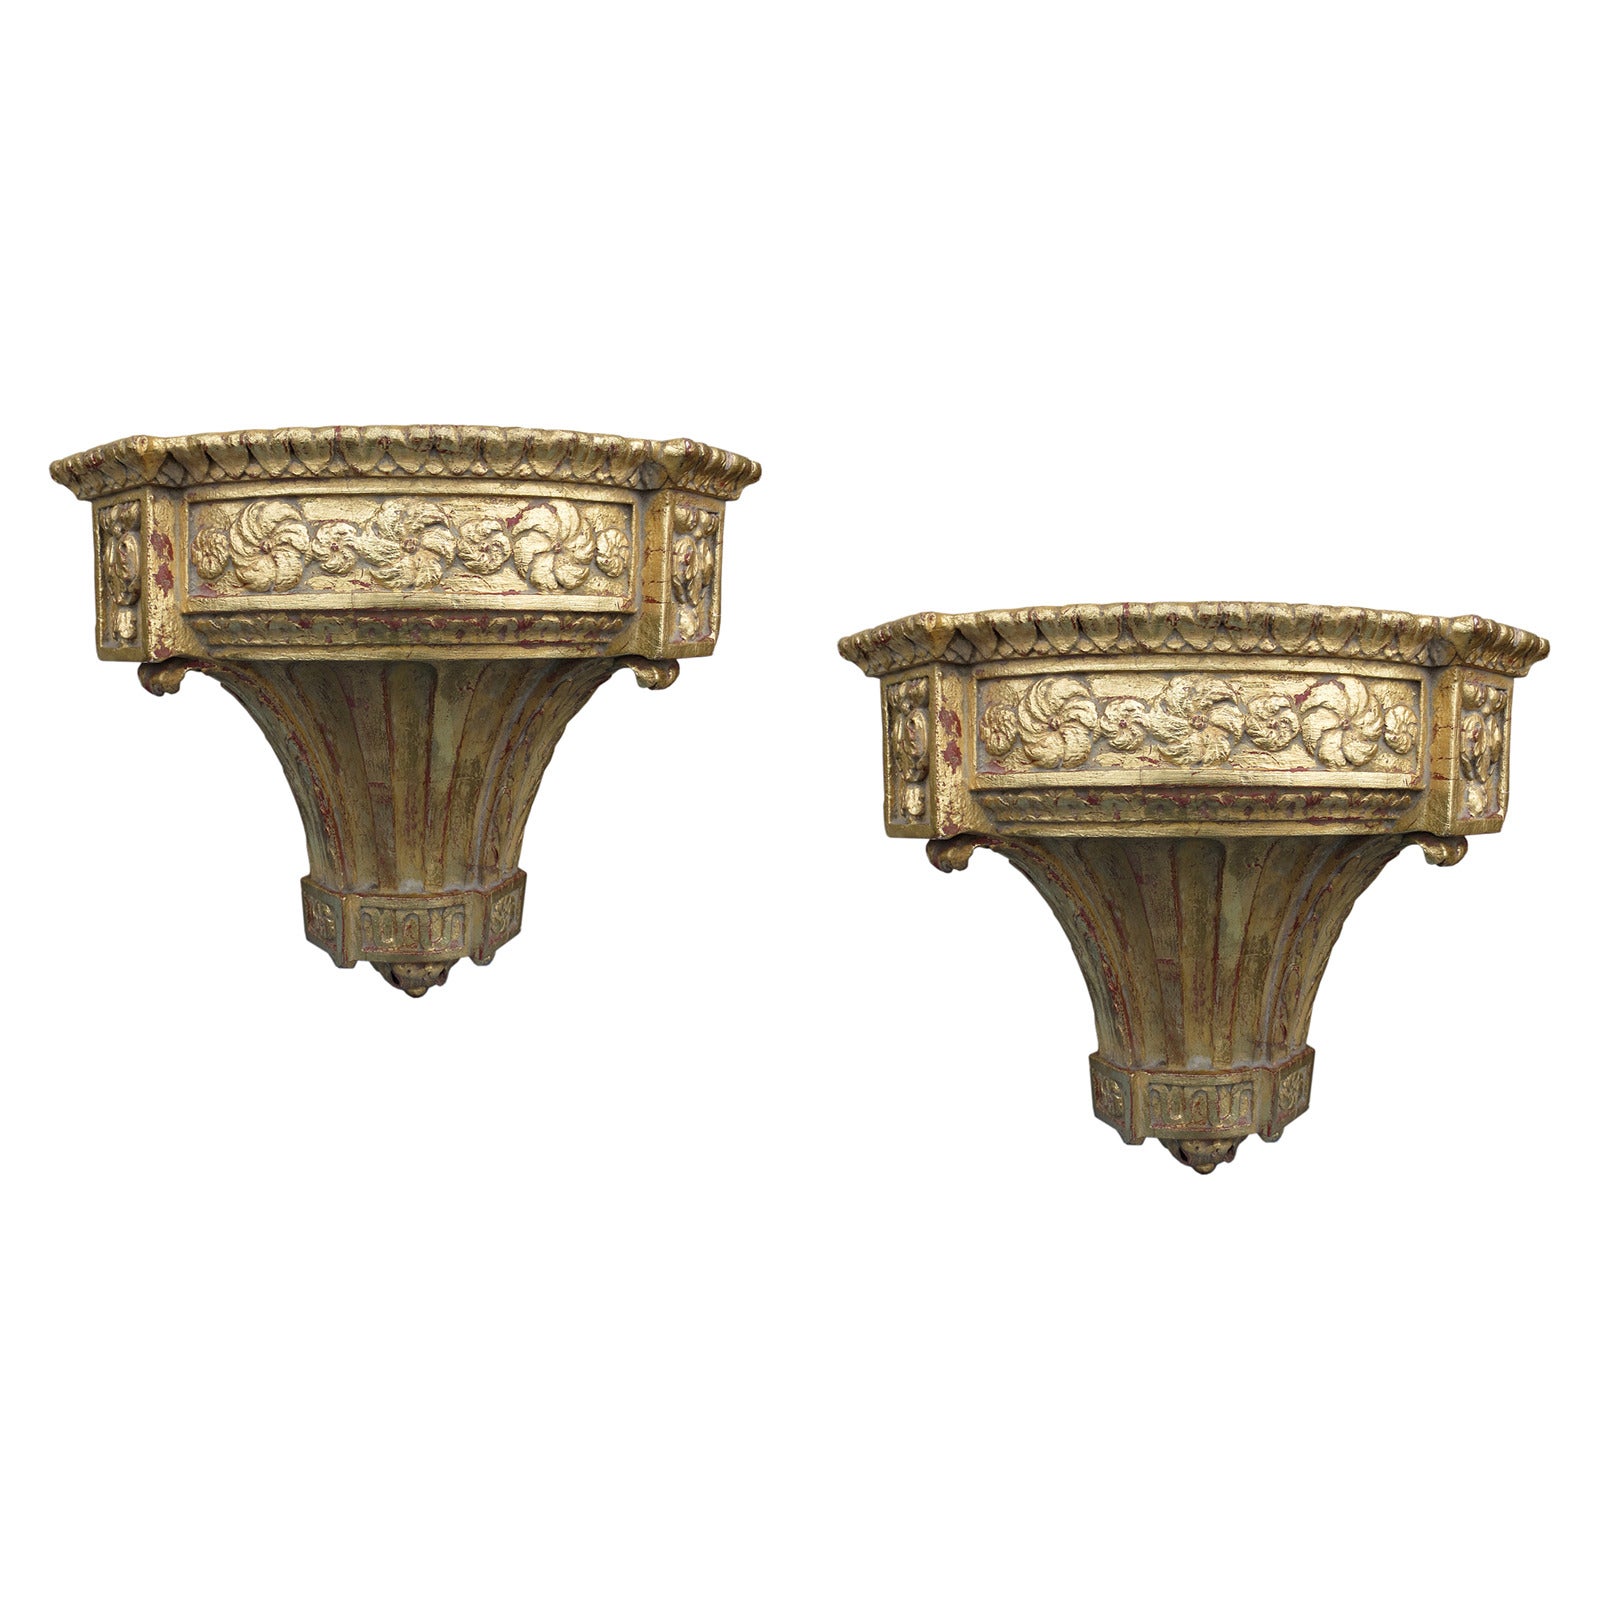 Pair of 19th Century French Neoclassical Giltwood Brackets